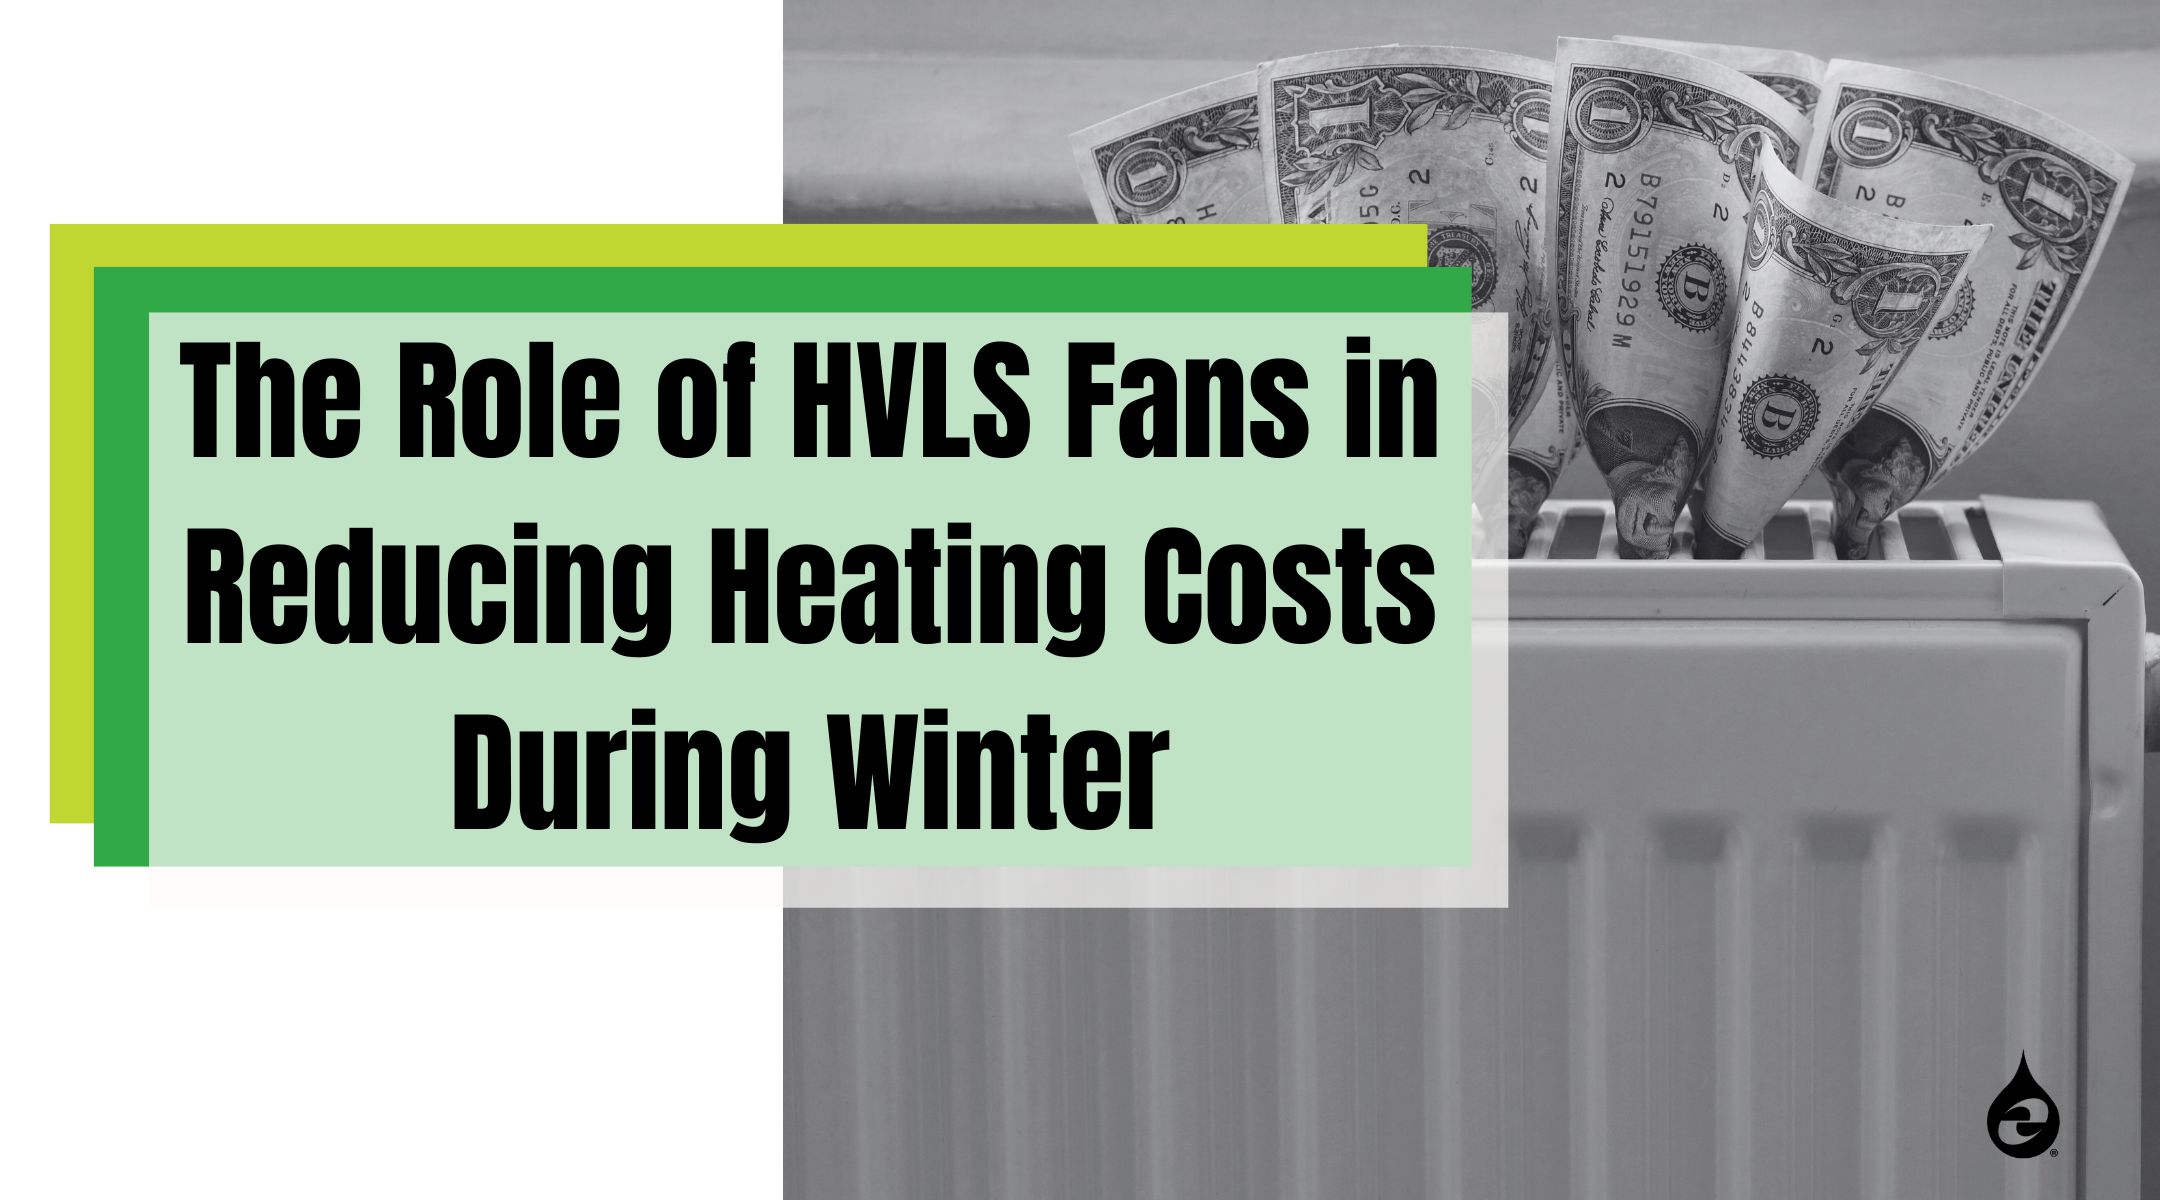 The Role of HVLS Fans in Reducing Heating Costs During Winter